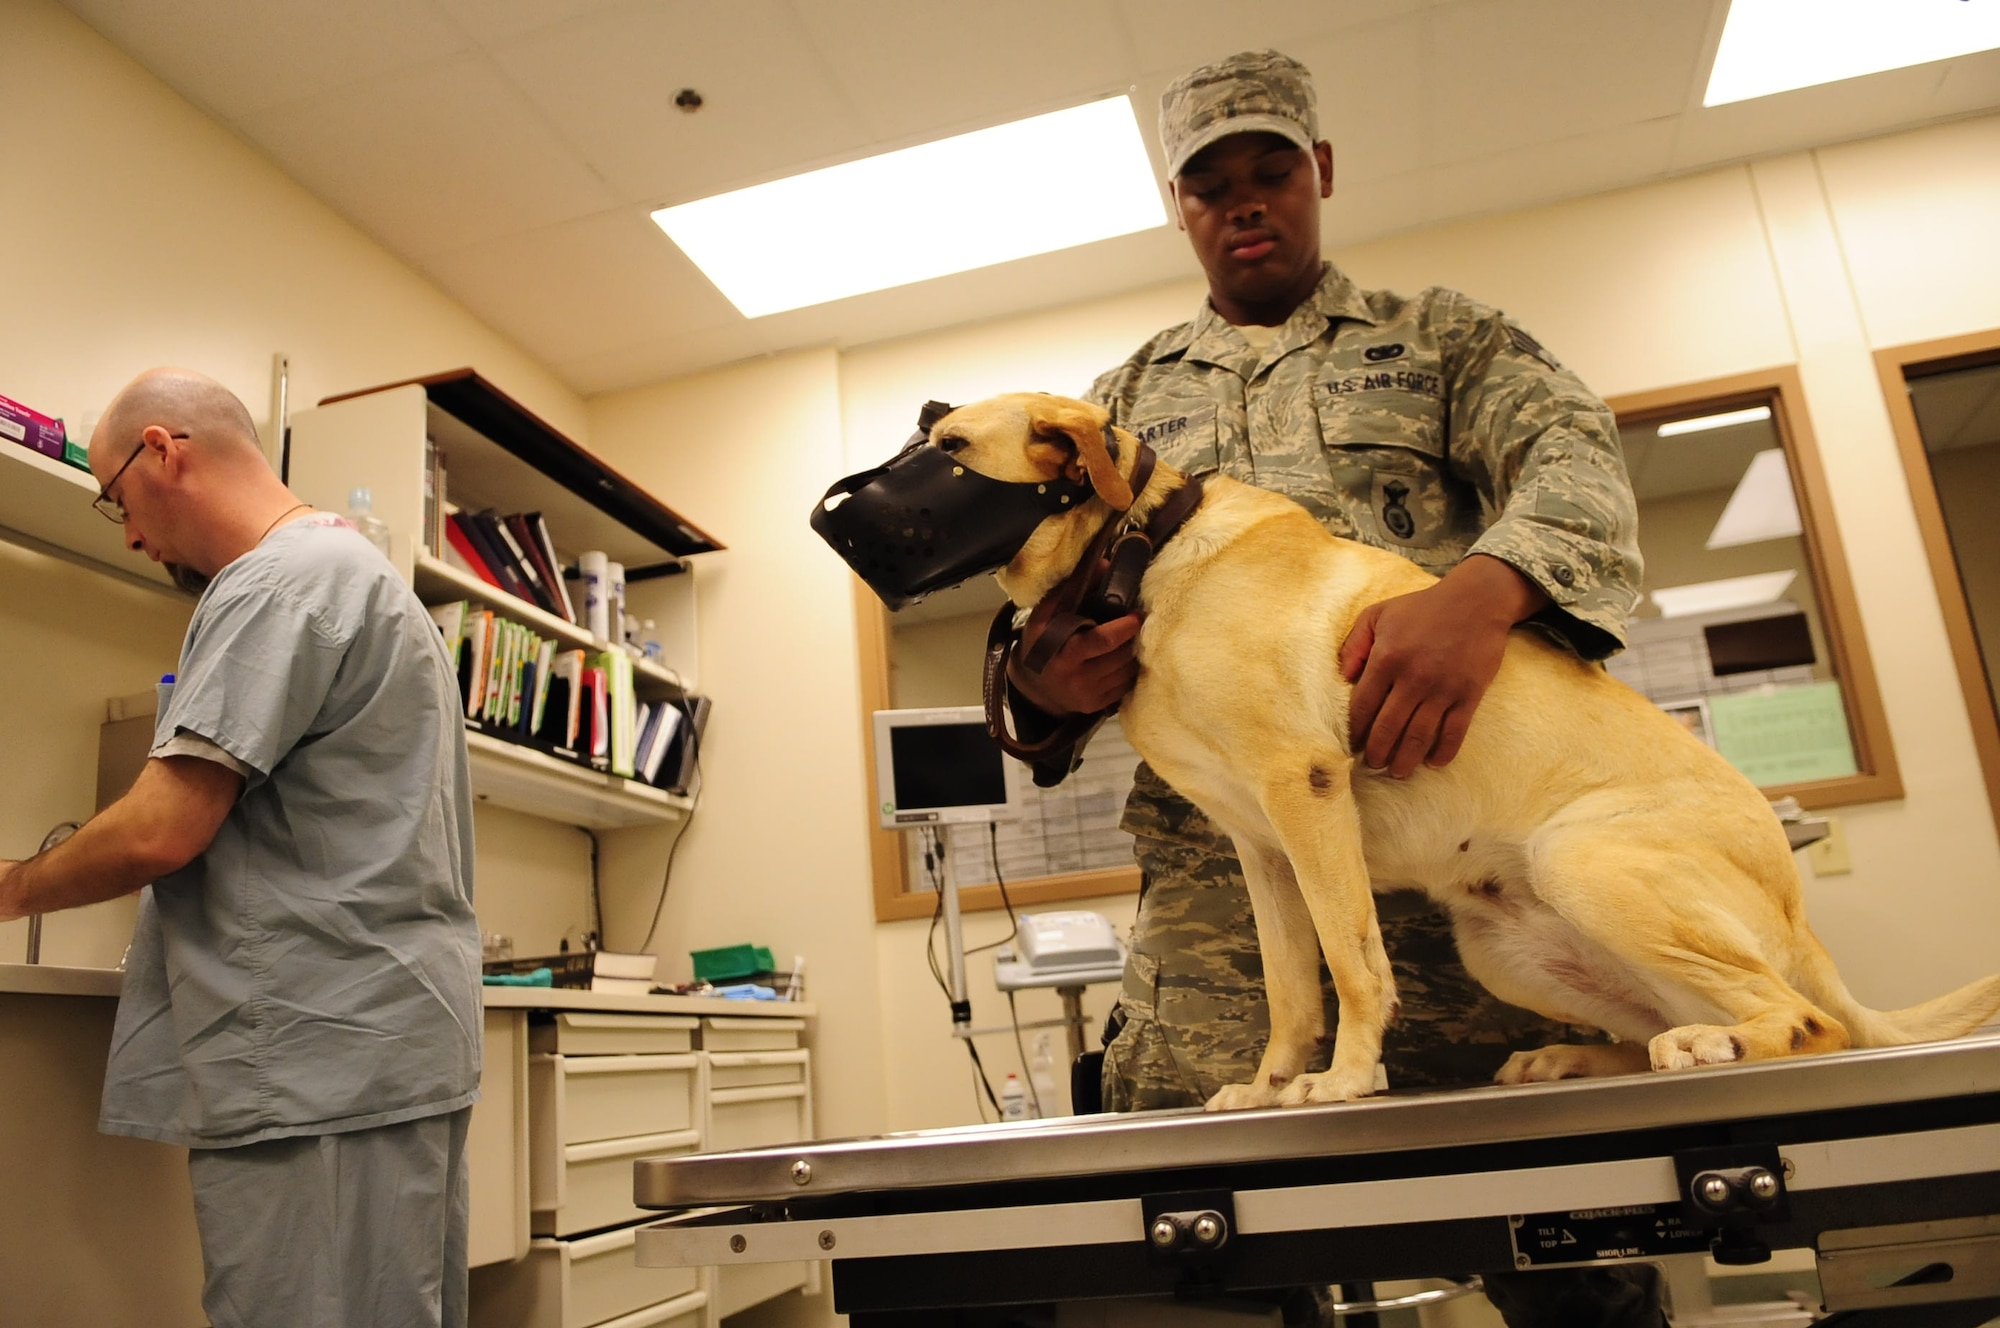 Mr. Rufus Fredrick and Senior Airman Tommy Carter conduct a weekly checkup on a military working dog at Lackland Air Force Base, Texas, recently. To reassure all military working dogs are in proper health, each dog is given a weekly checkup. (U.S. Air Force photo by Senior Airman Christopher Griffin)